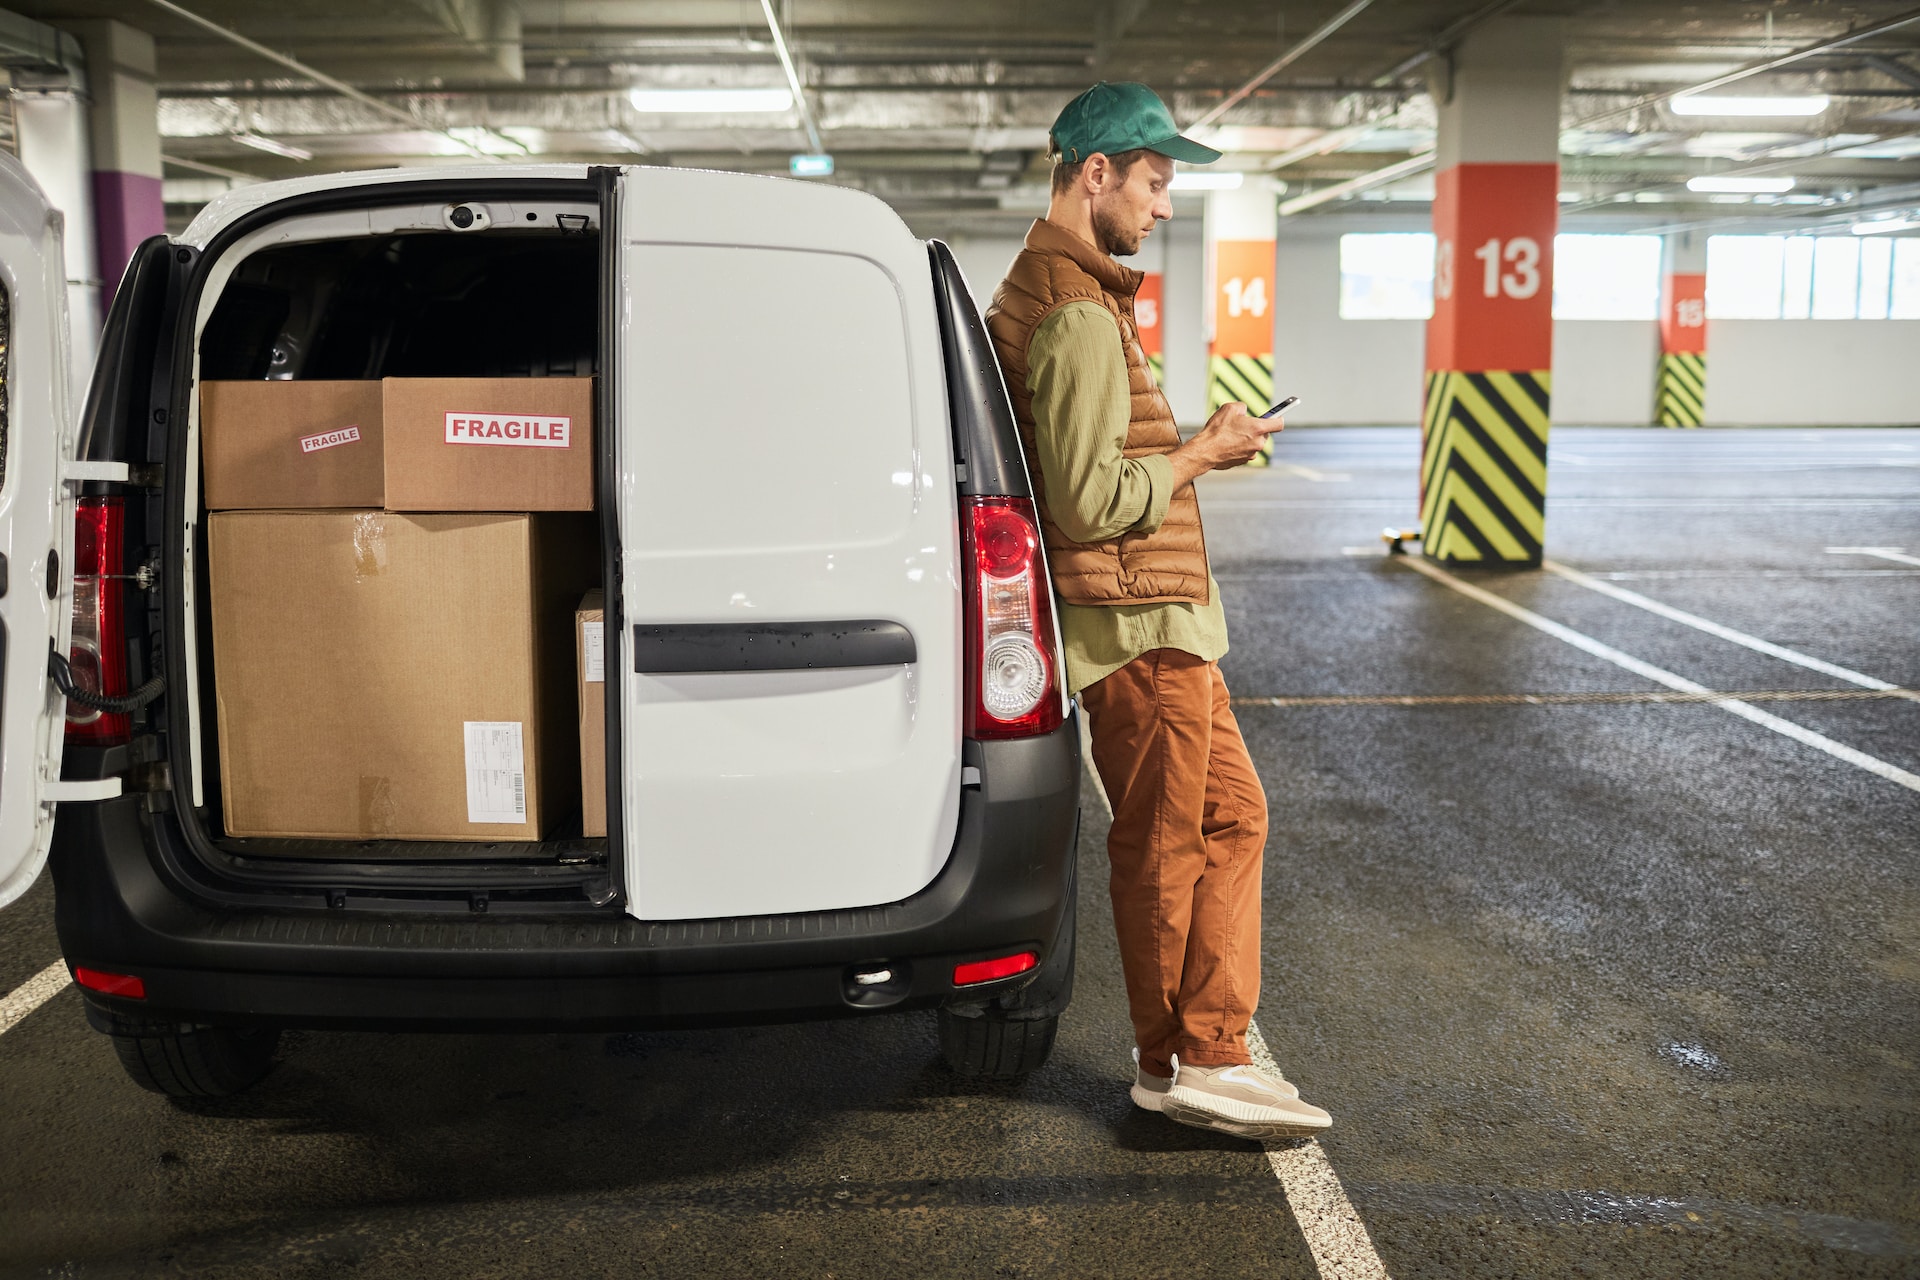 Starting A Retail Delivery Business: Top 10 Tips